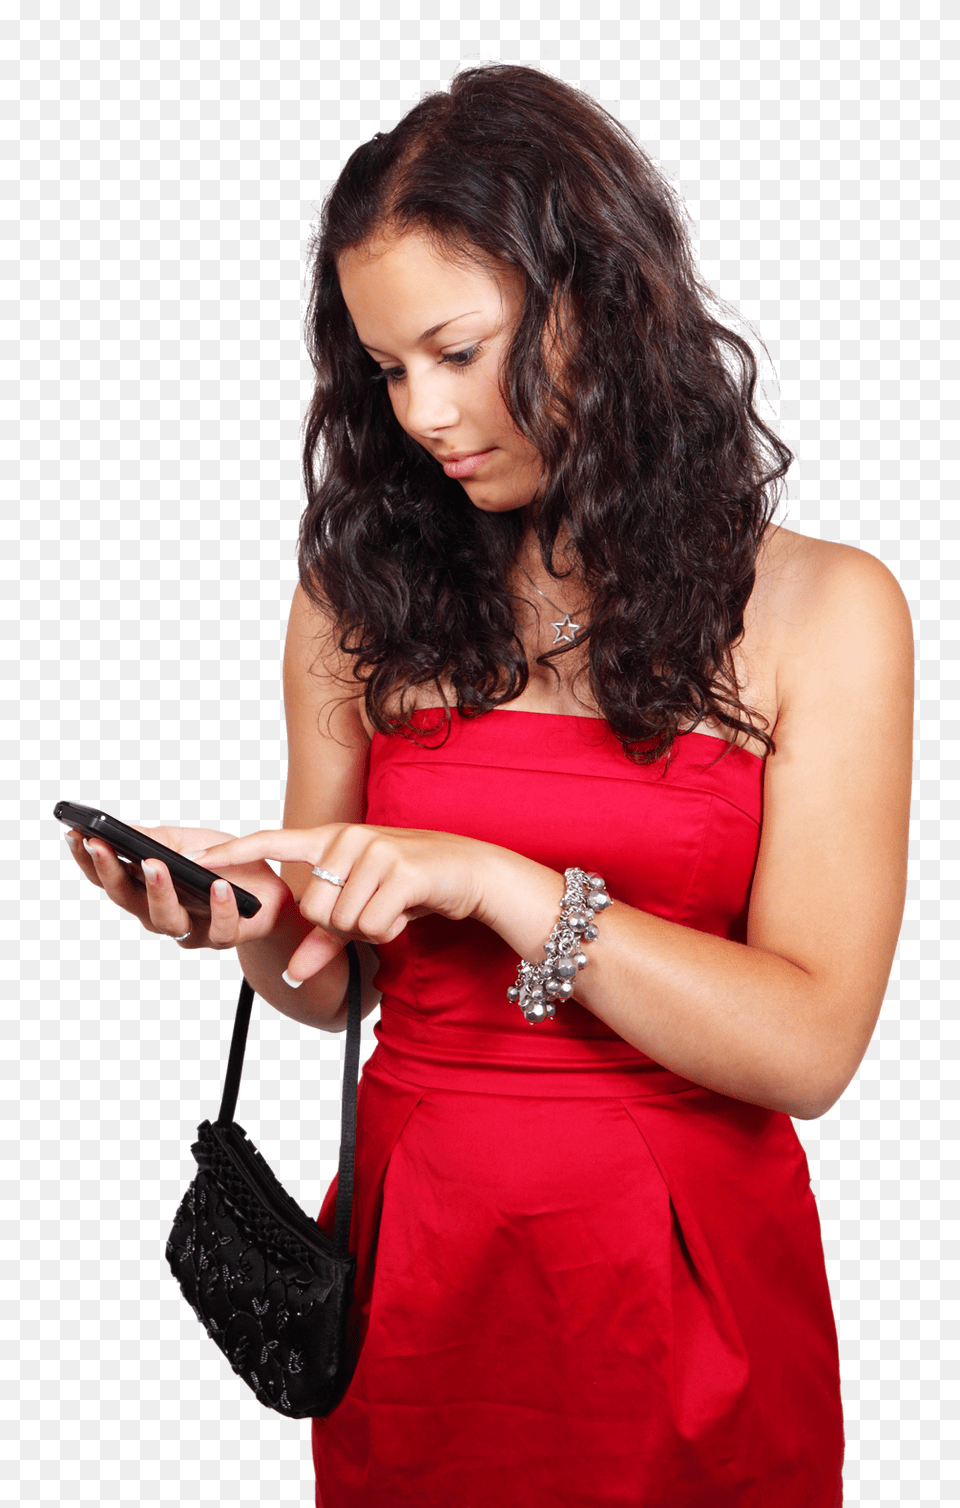 Girl With Mobile Phone Image, Accessories, Weapon, Person, Handbag Free Png Download